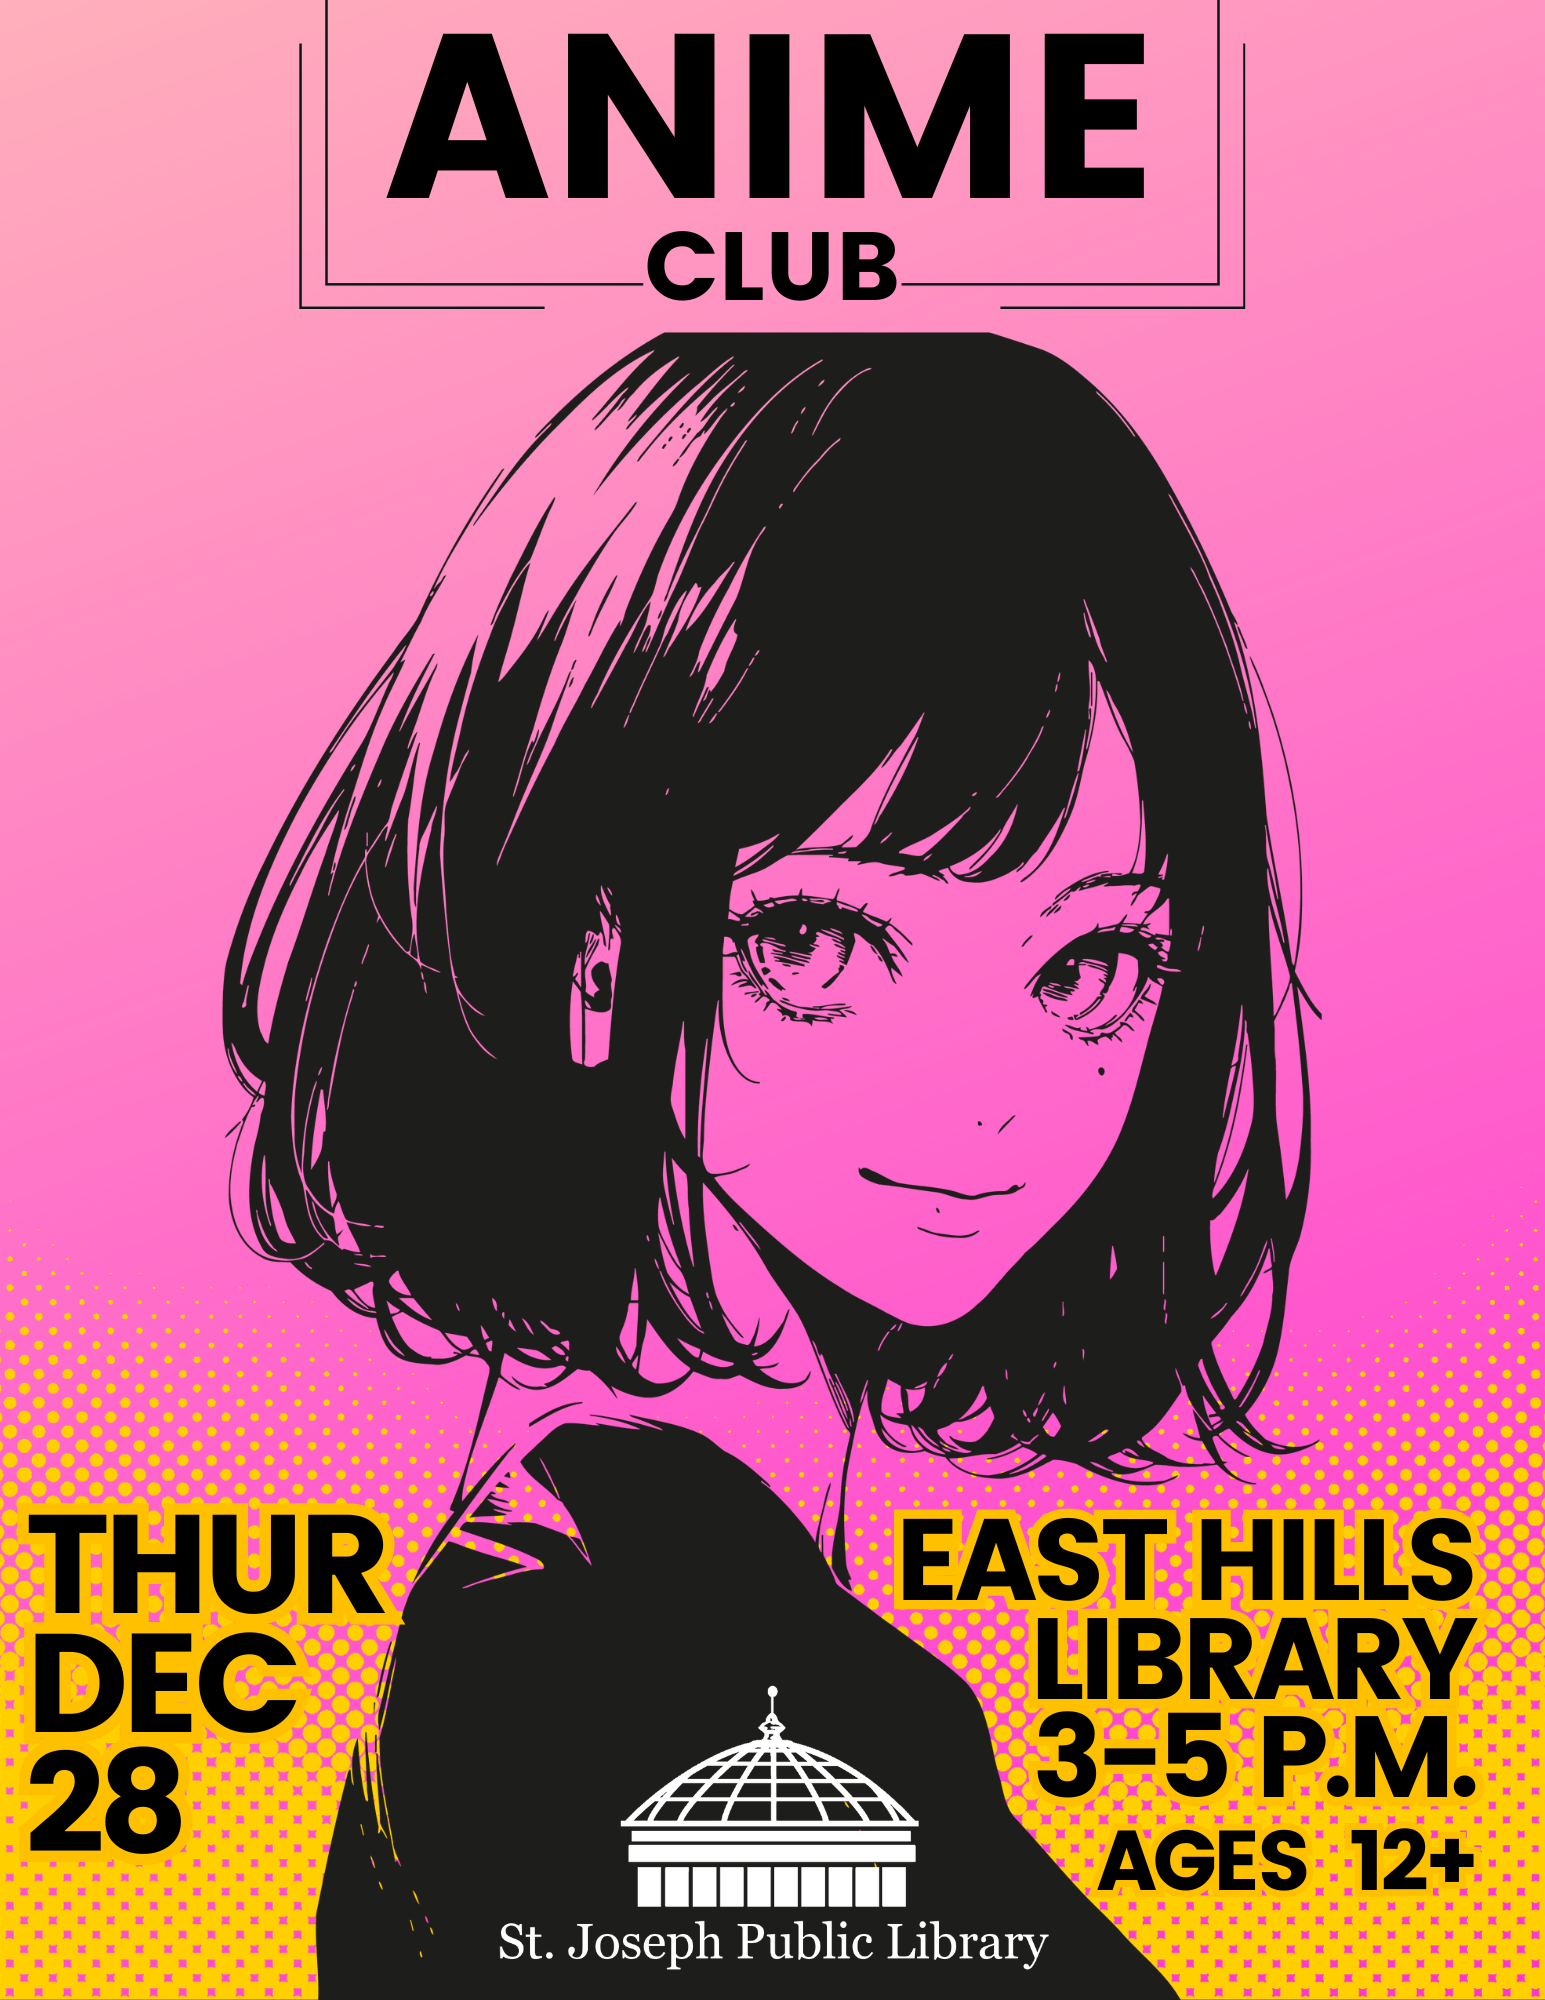 Anime Club, ages 12+, East Hills Library Dec. 28, 3-5 p.m.